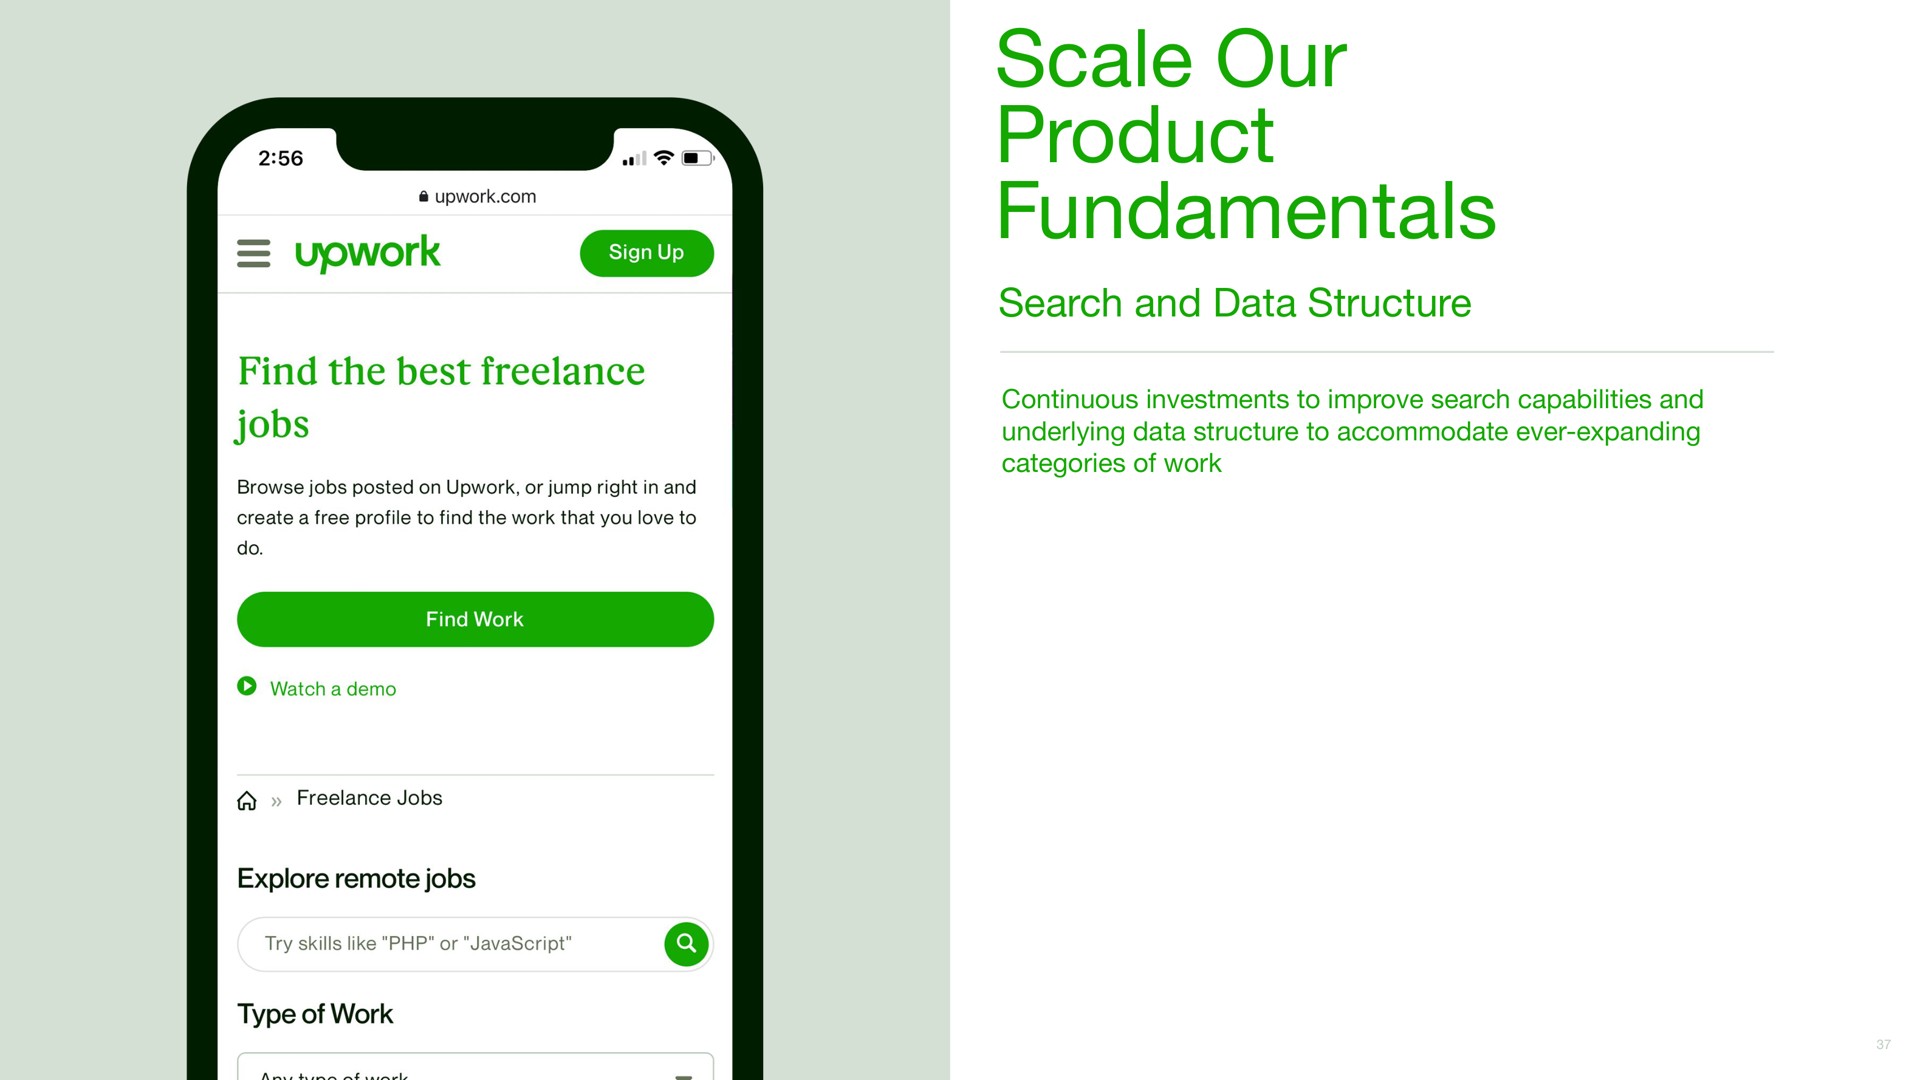 scale our product fundamentals | Upwork